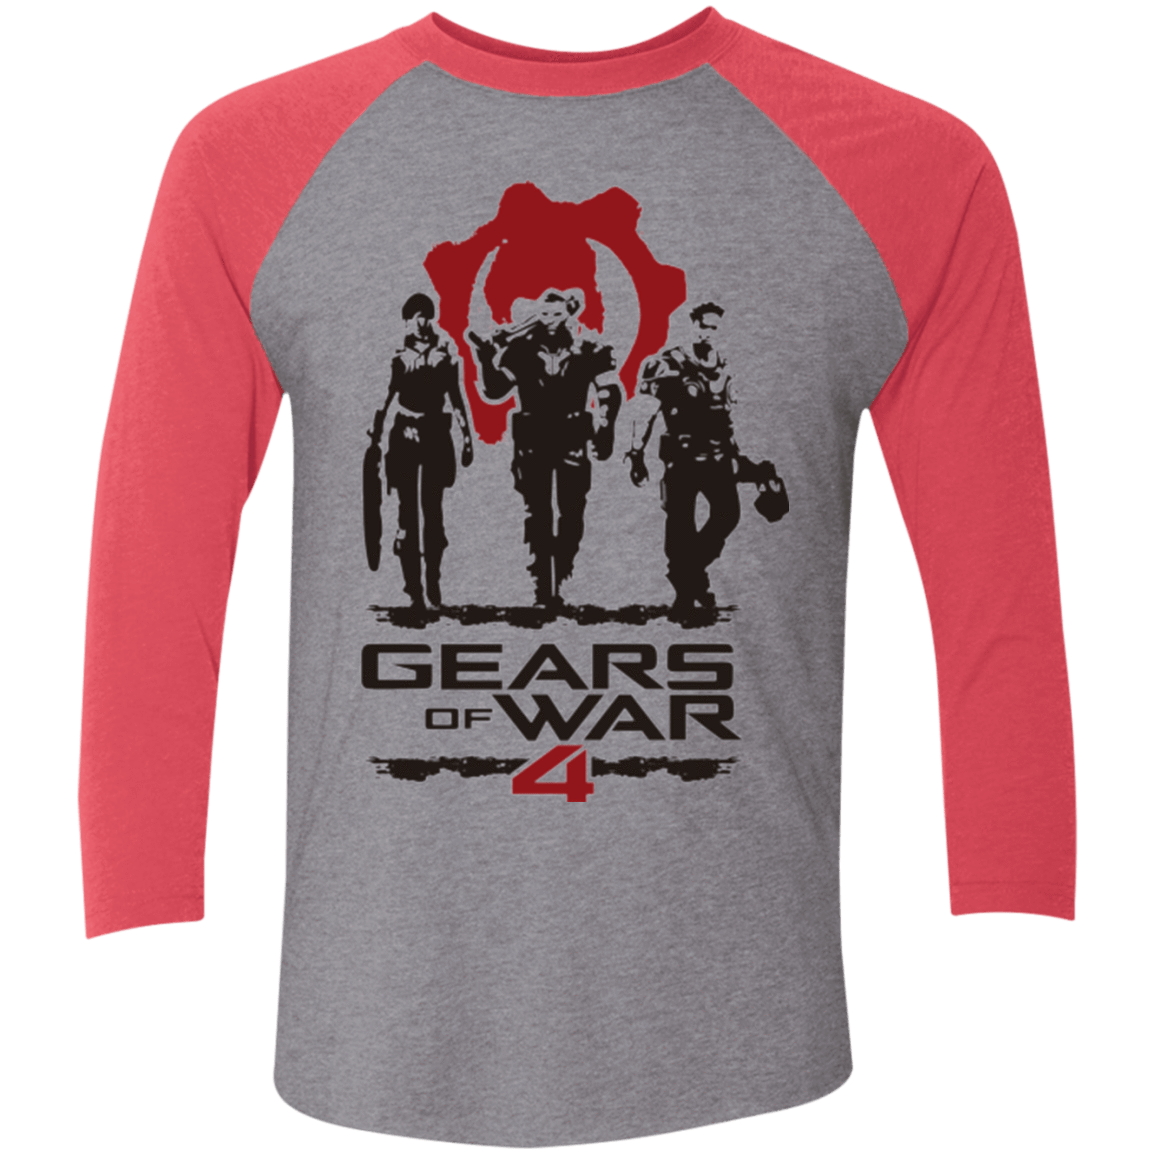 T-Shirts Premium Heather/ Vintage Red / X-Small Gears Of War 4 White Men's Triblend 3/4 Sleeve